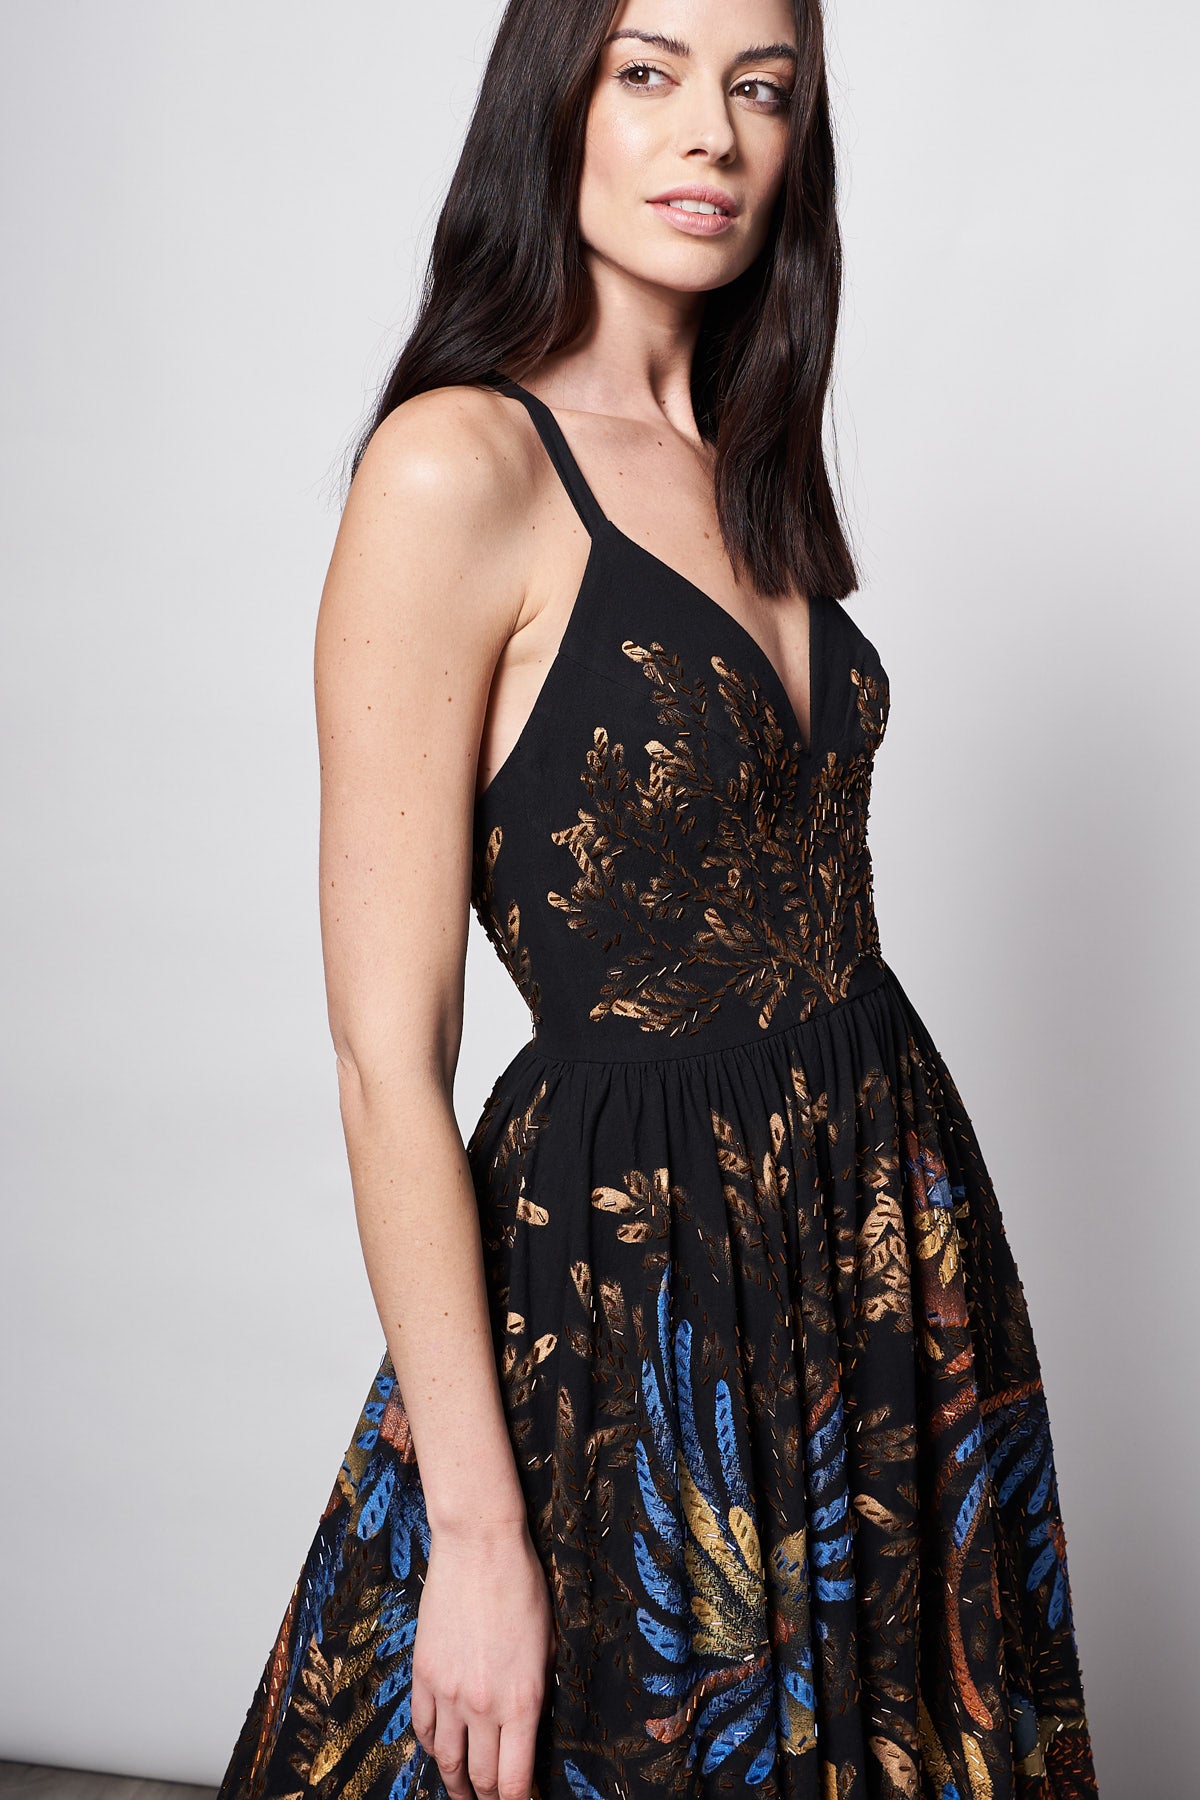 HAND-PAINTED AND HAND-EMBROIDERED V-NECK LONG DRESS - PAPEL AMATE